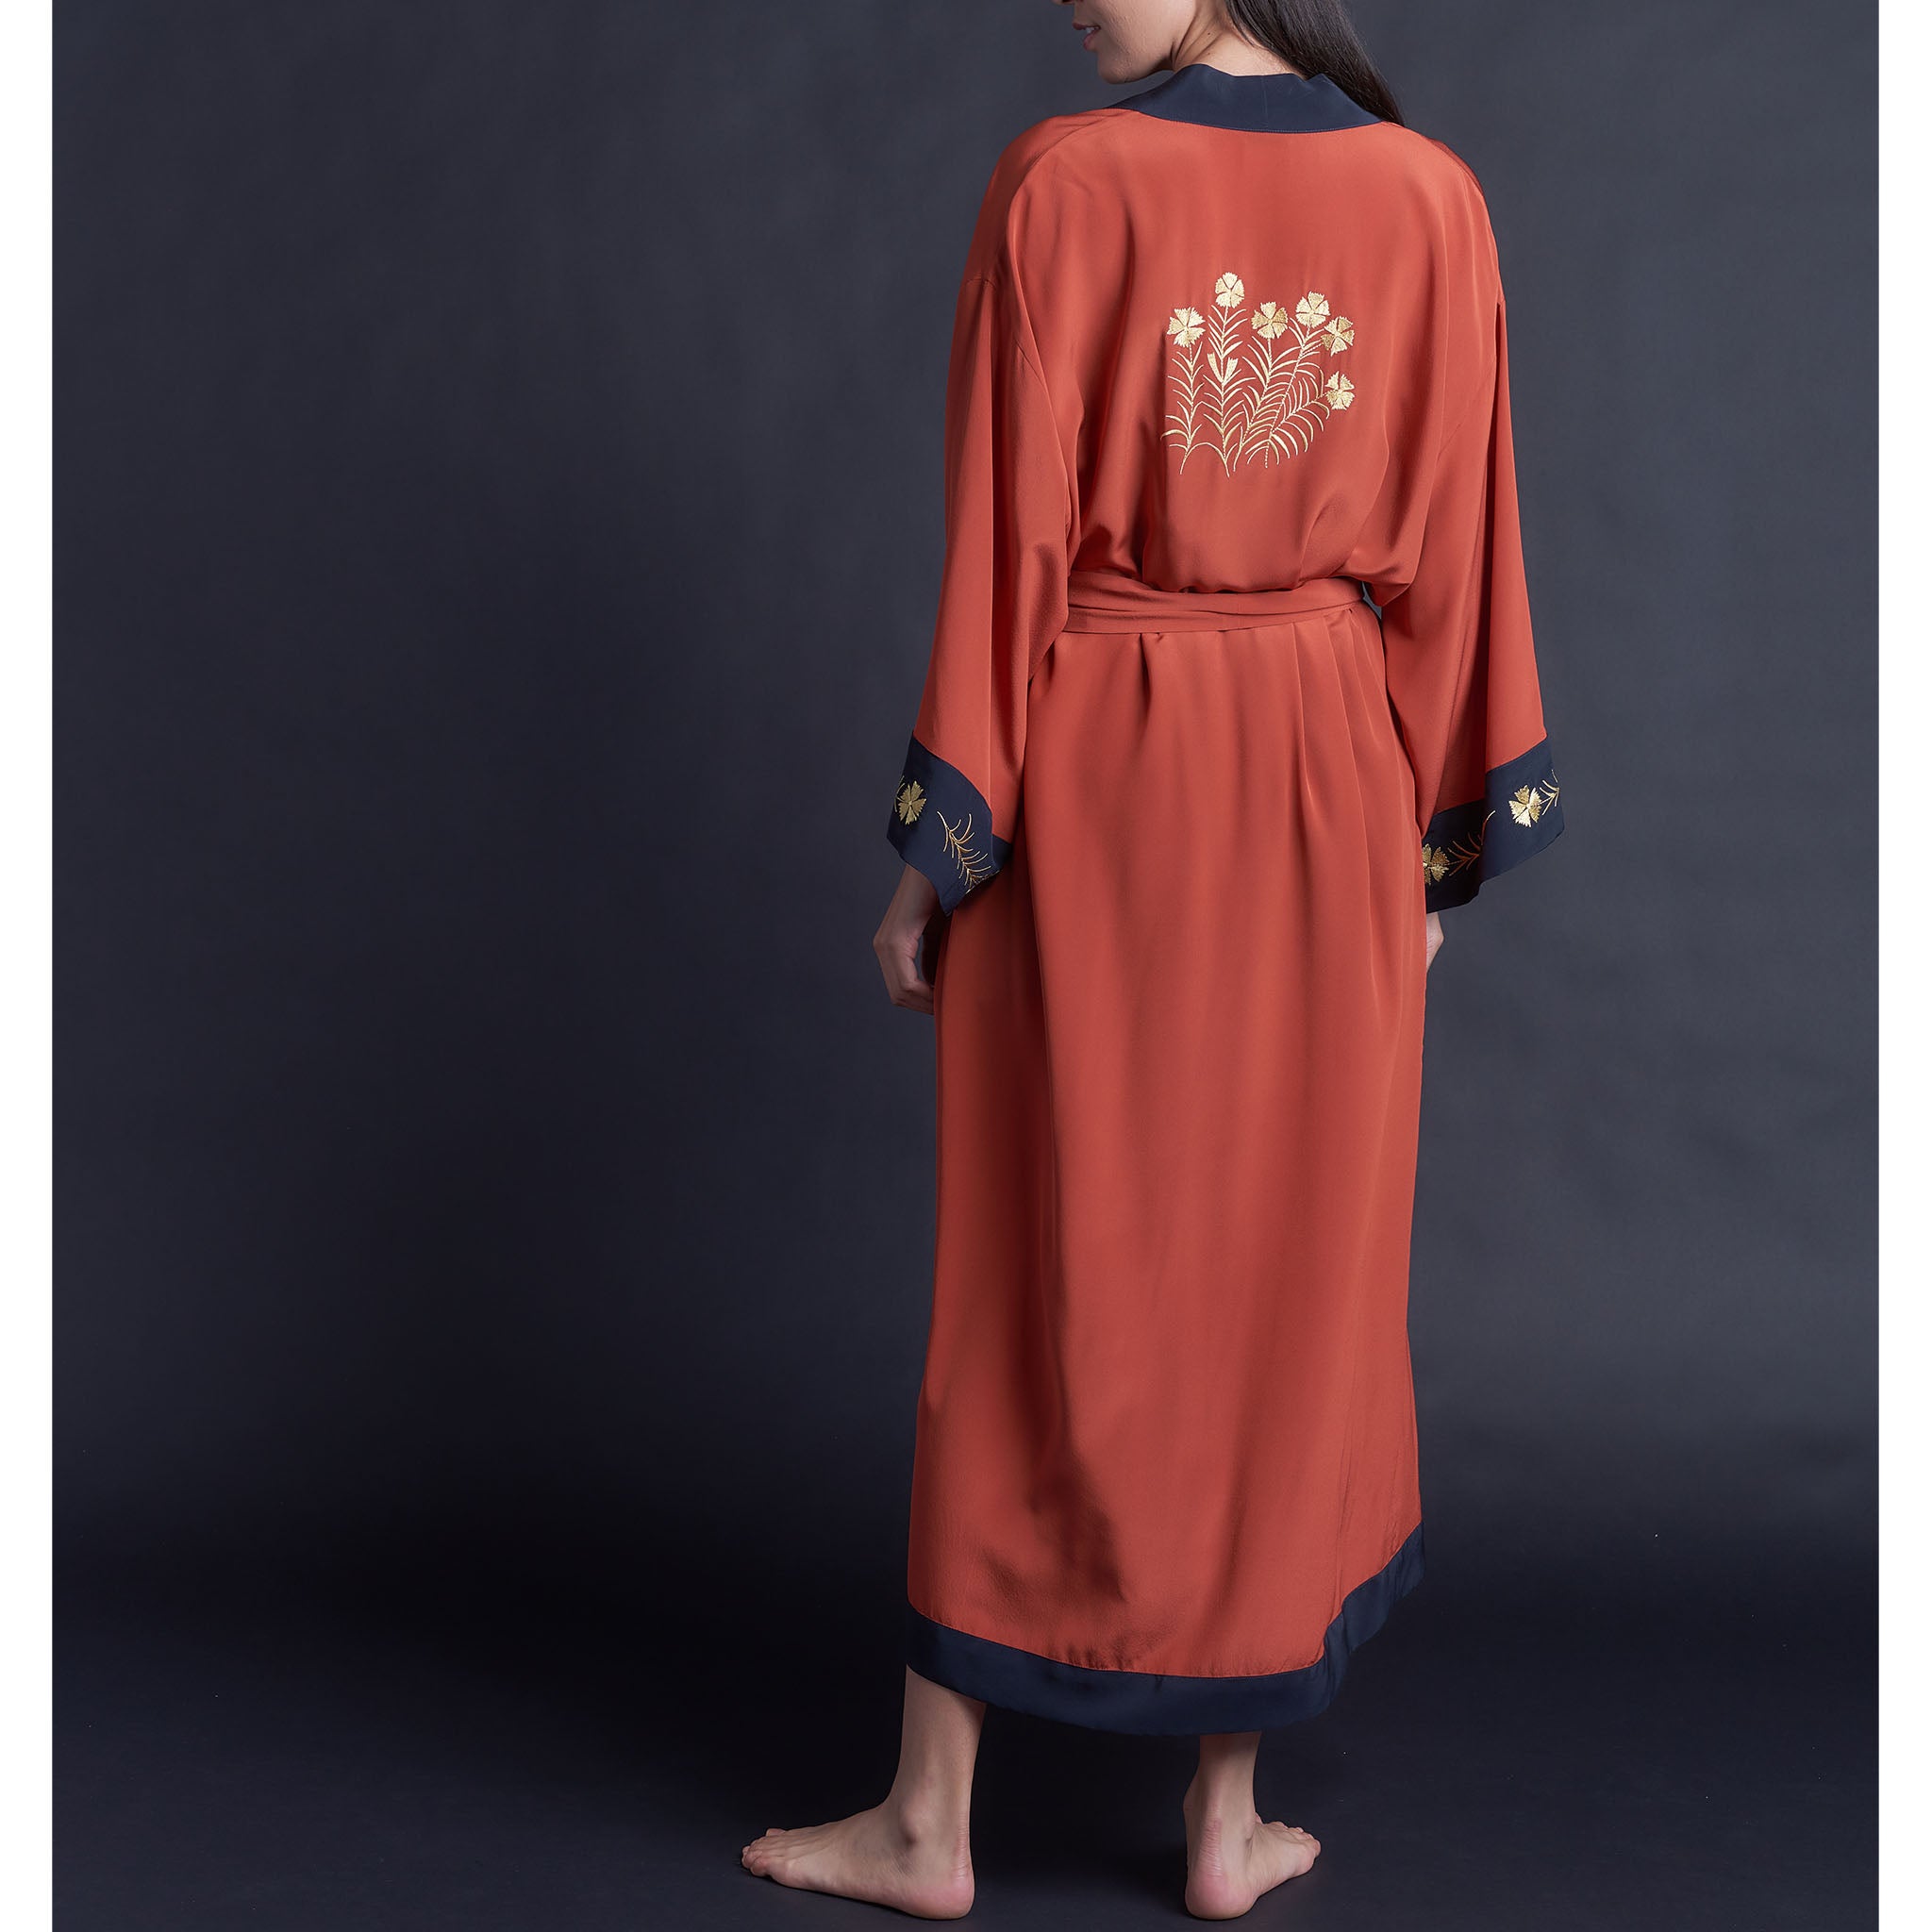 Asteria Robe in Special Edition Embroidered Cinnabar Crepe de Chine